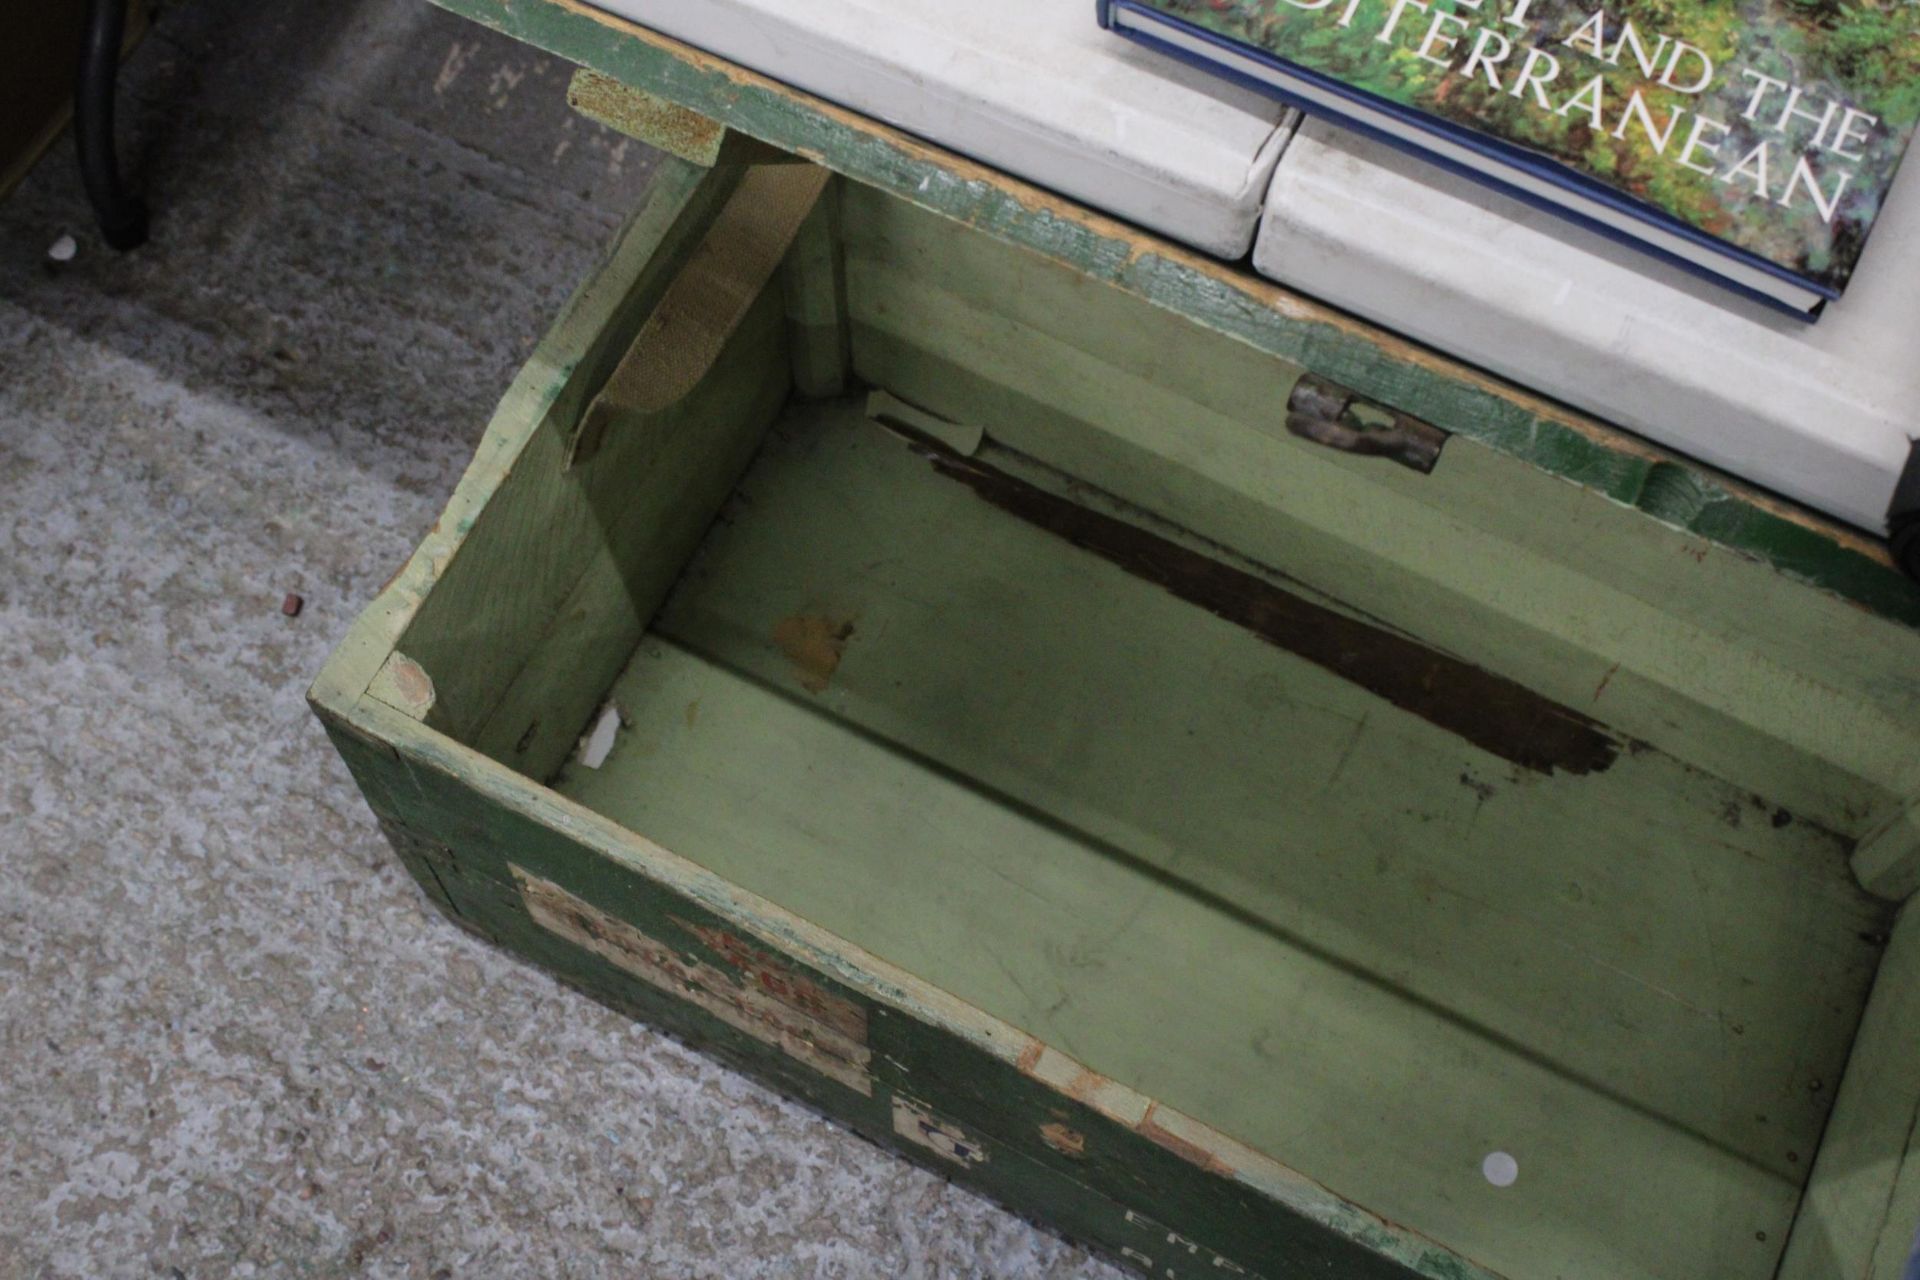 A WOODEN MILITARY TRAVEL TRUNK, 'EMPRESS OF AUSTRALIA', HEIGHT 36 CM, LENGTH 80 CM, DEPTH 44 CM - Image 3 of 3